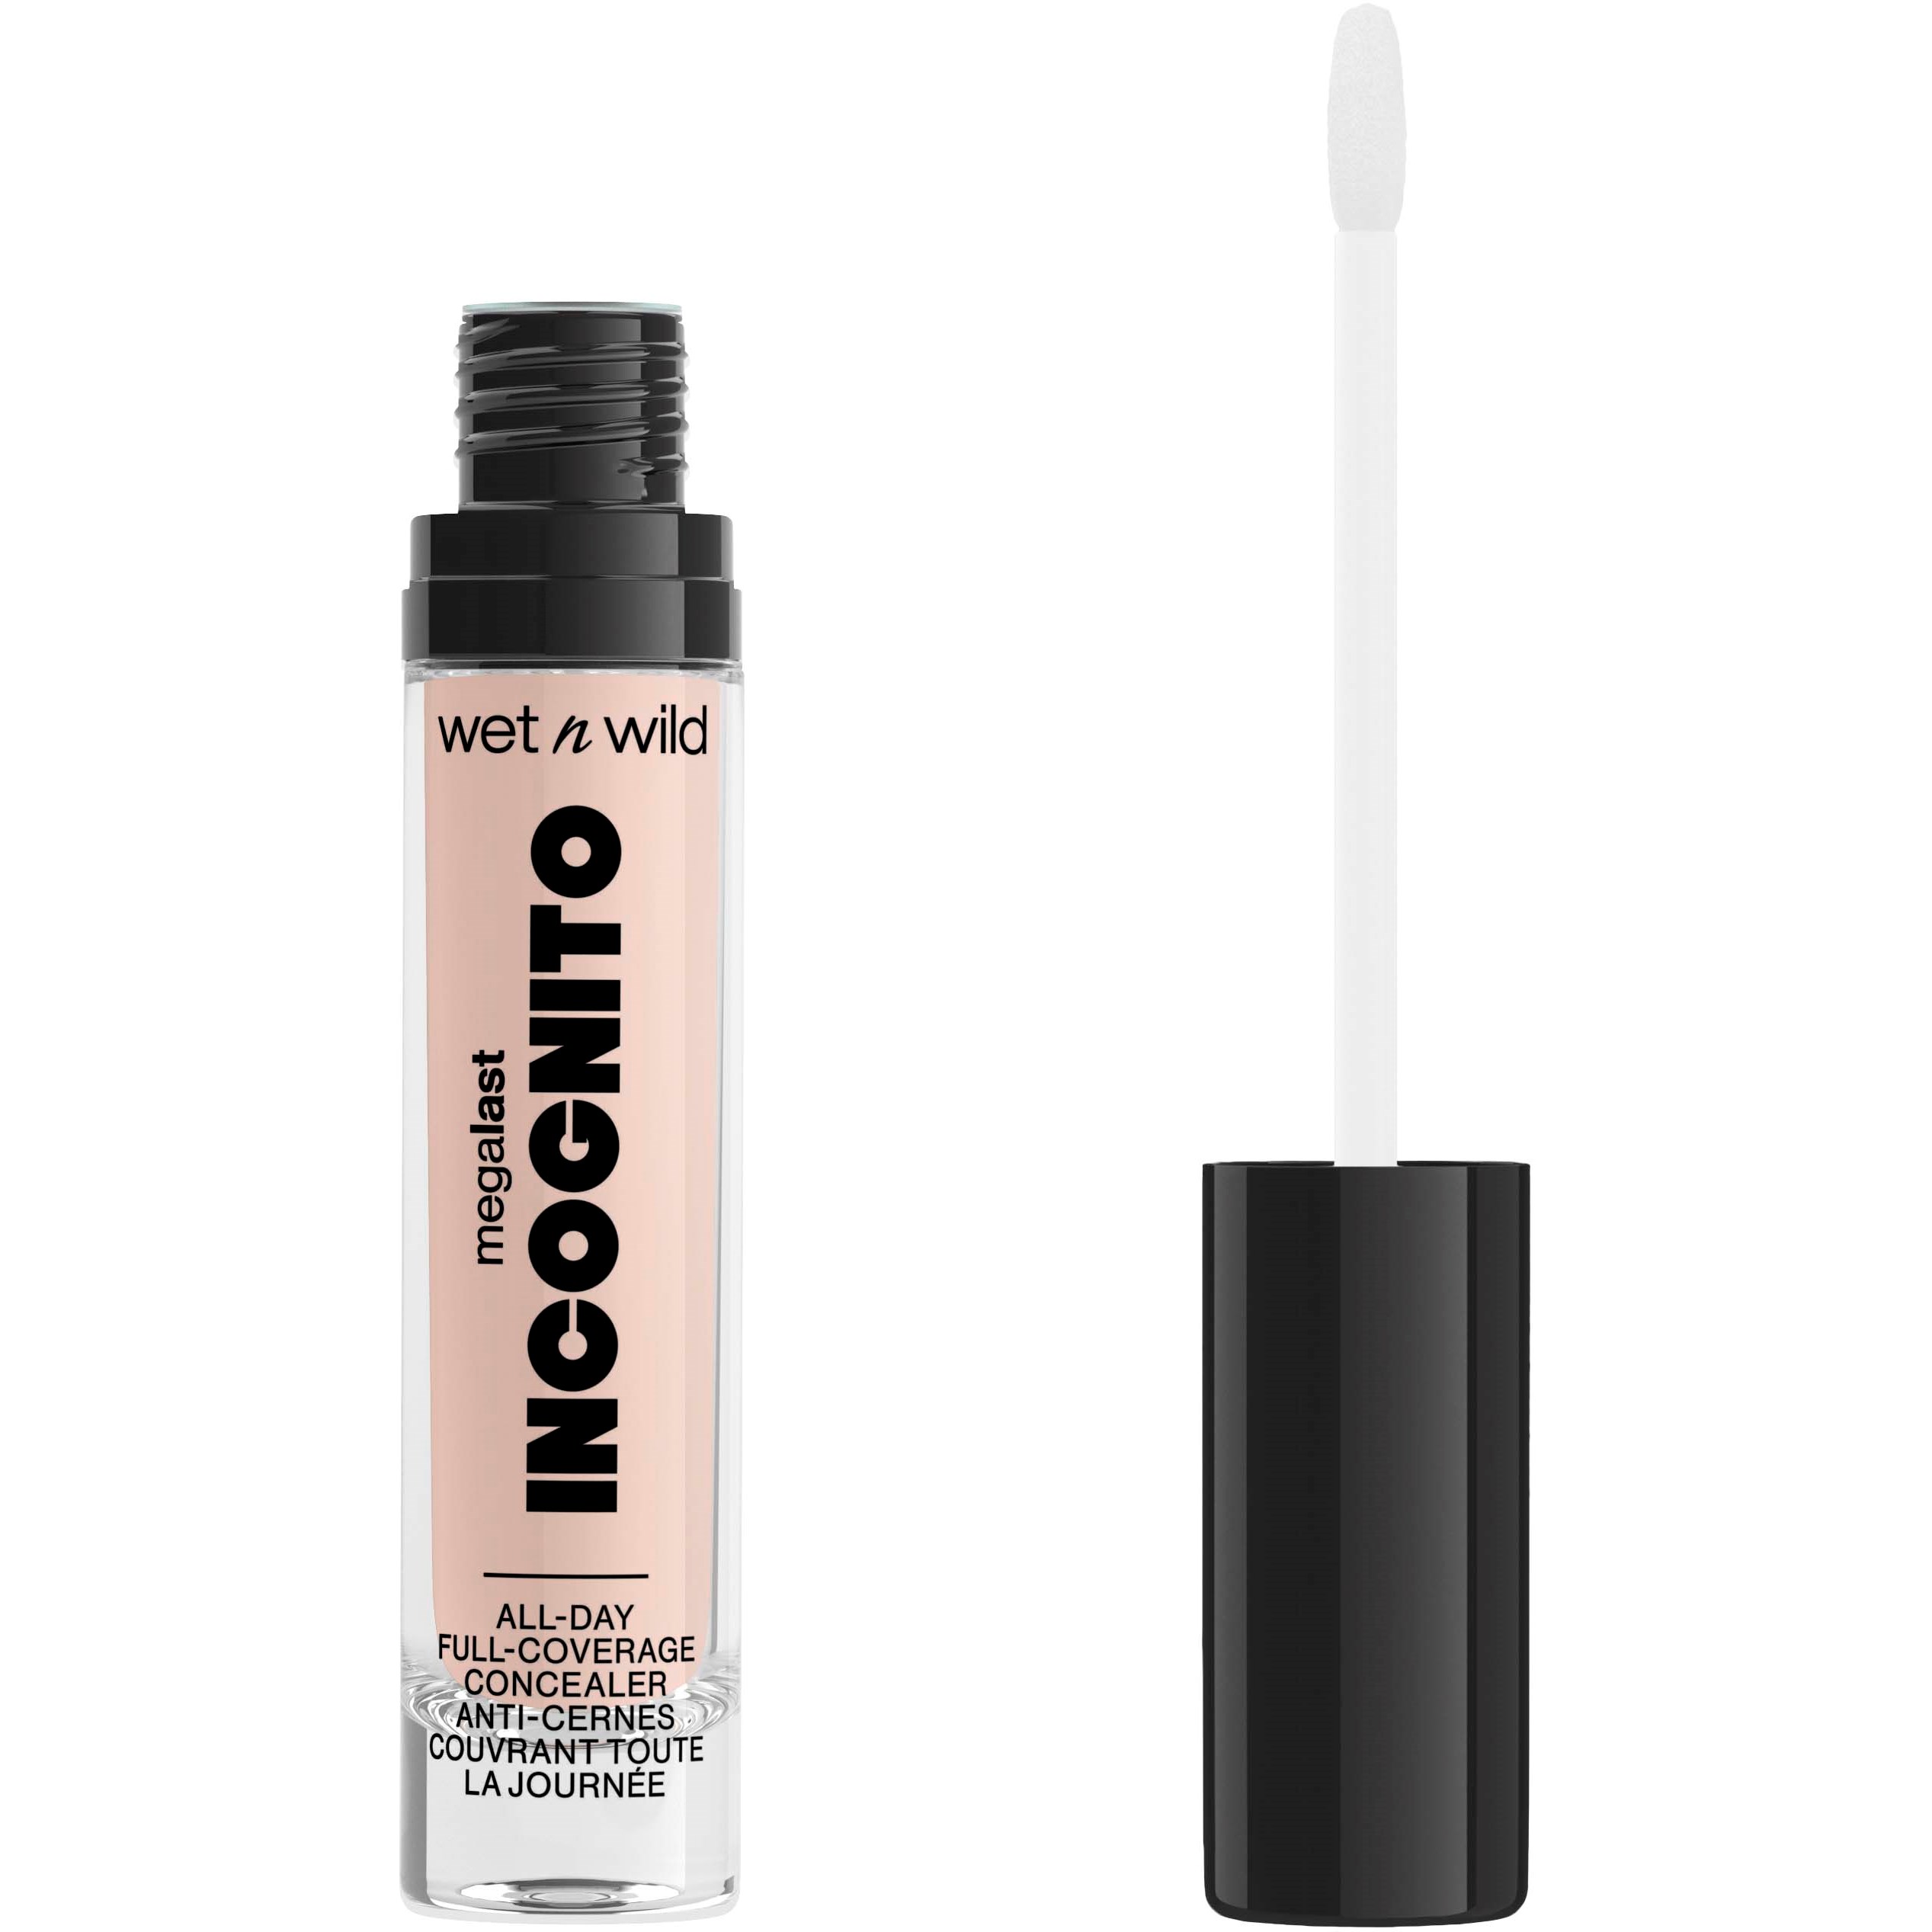 Wet n Wild MegaLast Incognito AllDay Full Coverage Concealer Light Bei